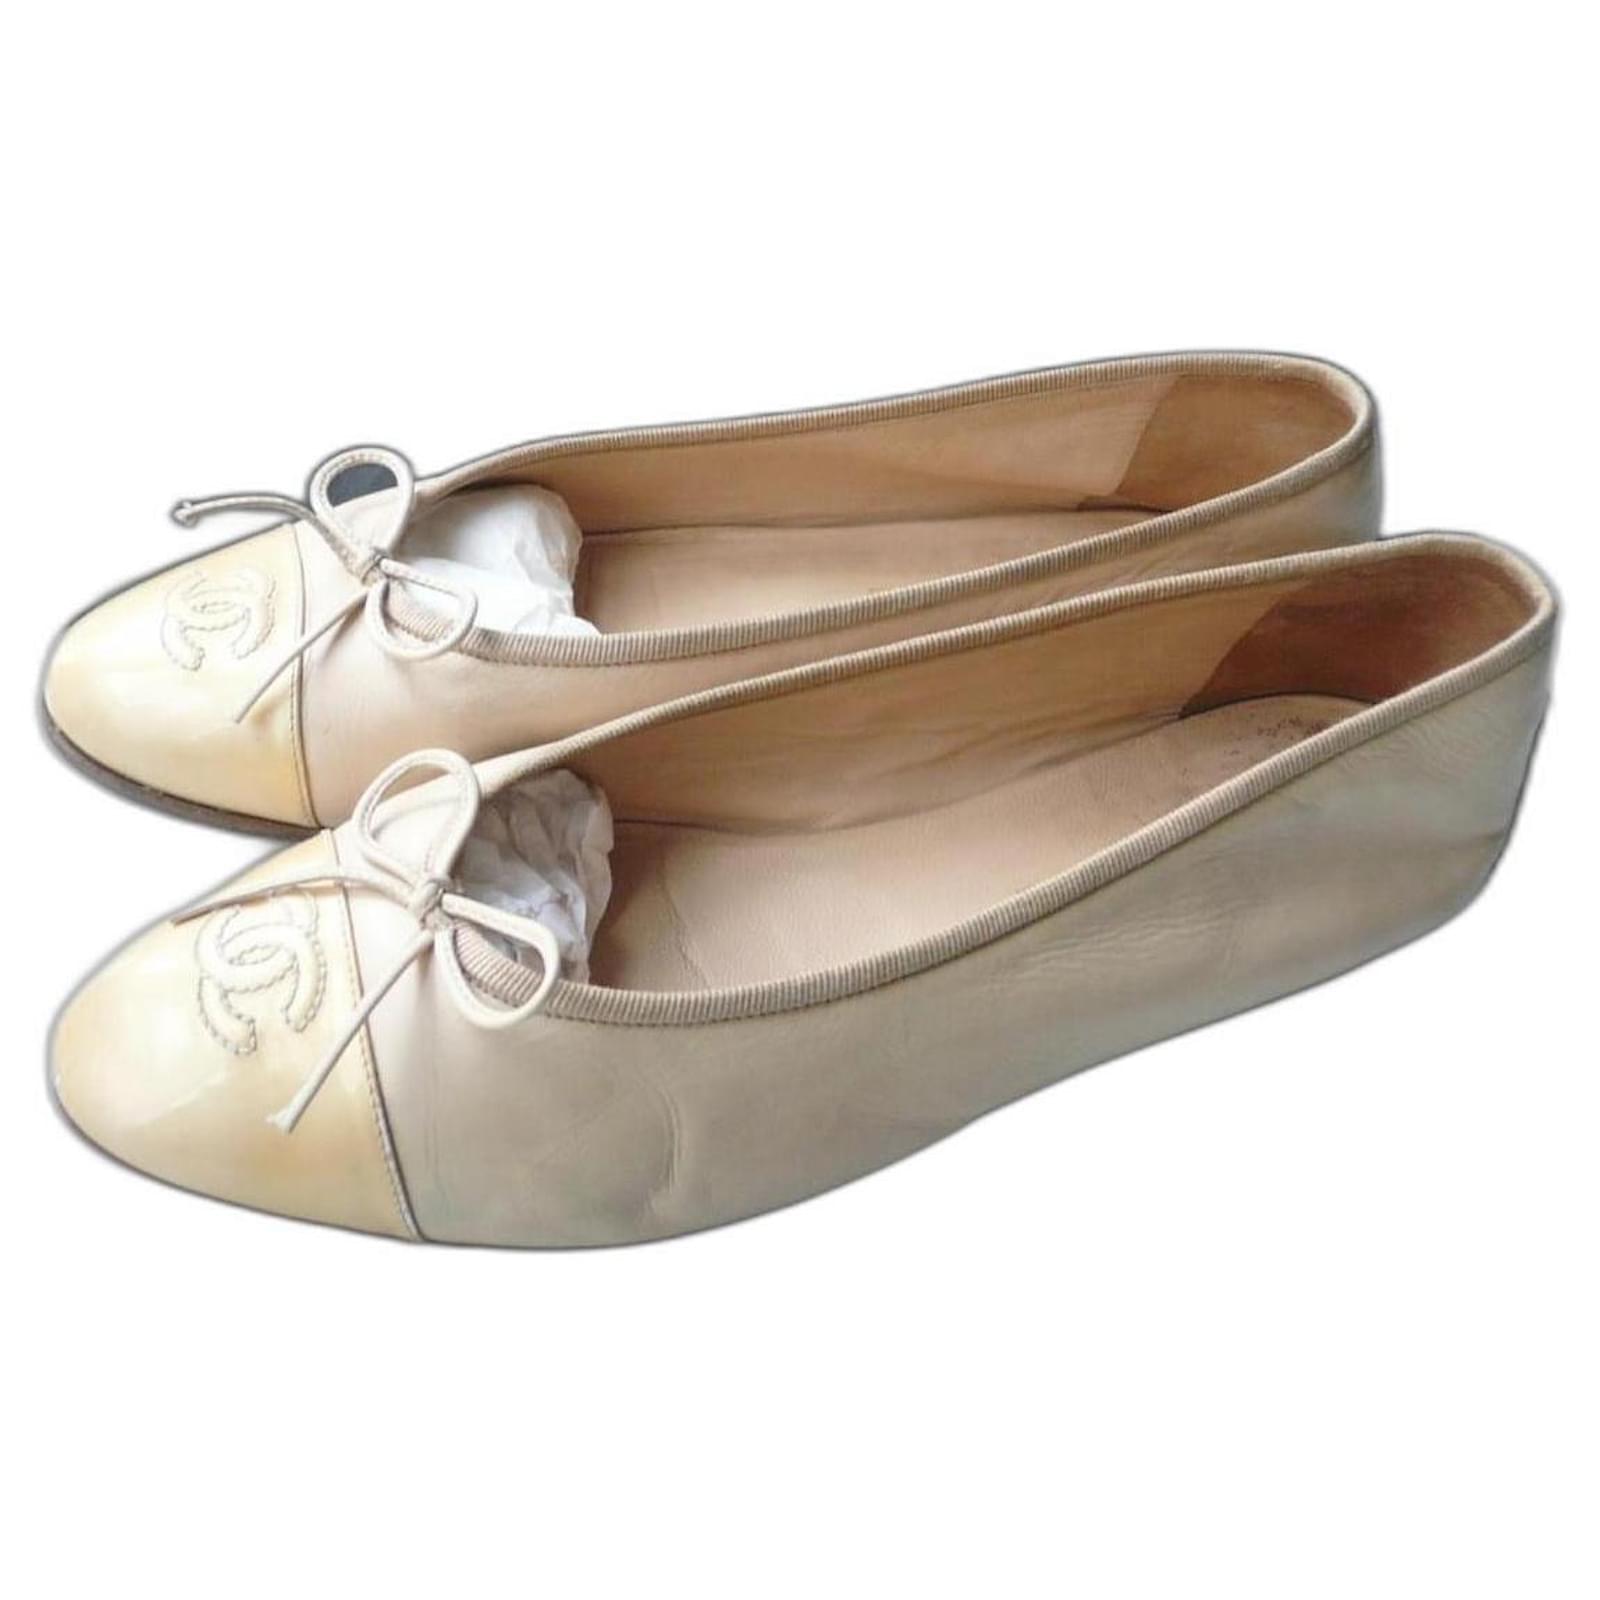 CHANEL, Shoes, Chanel Pebbled Leather Ballet Flat